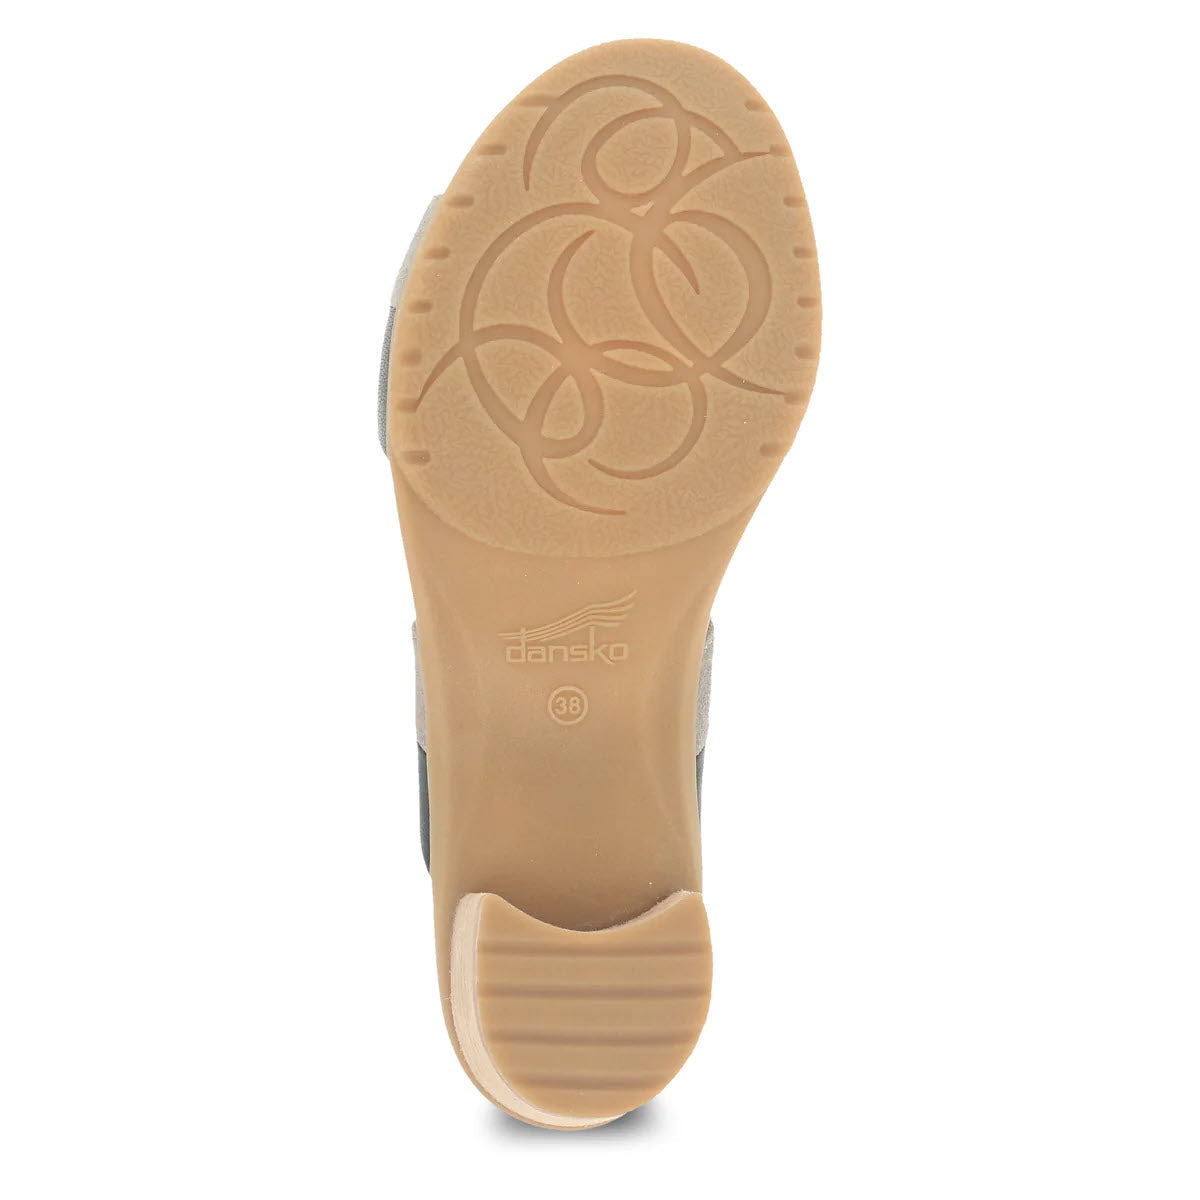 Bottom view of a tan Dansko Thersea Black Multi sandal showing the tread pattern and brand logo.